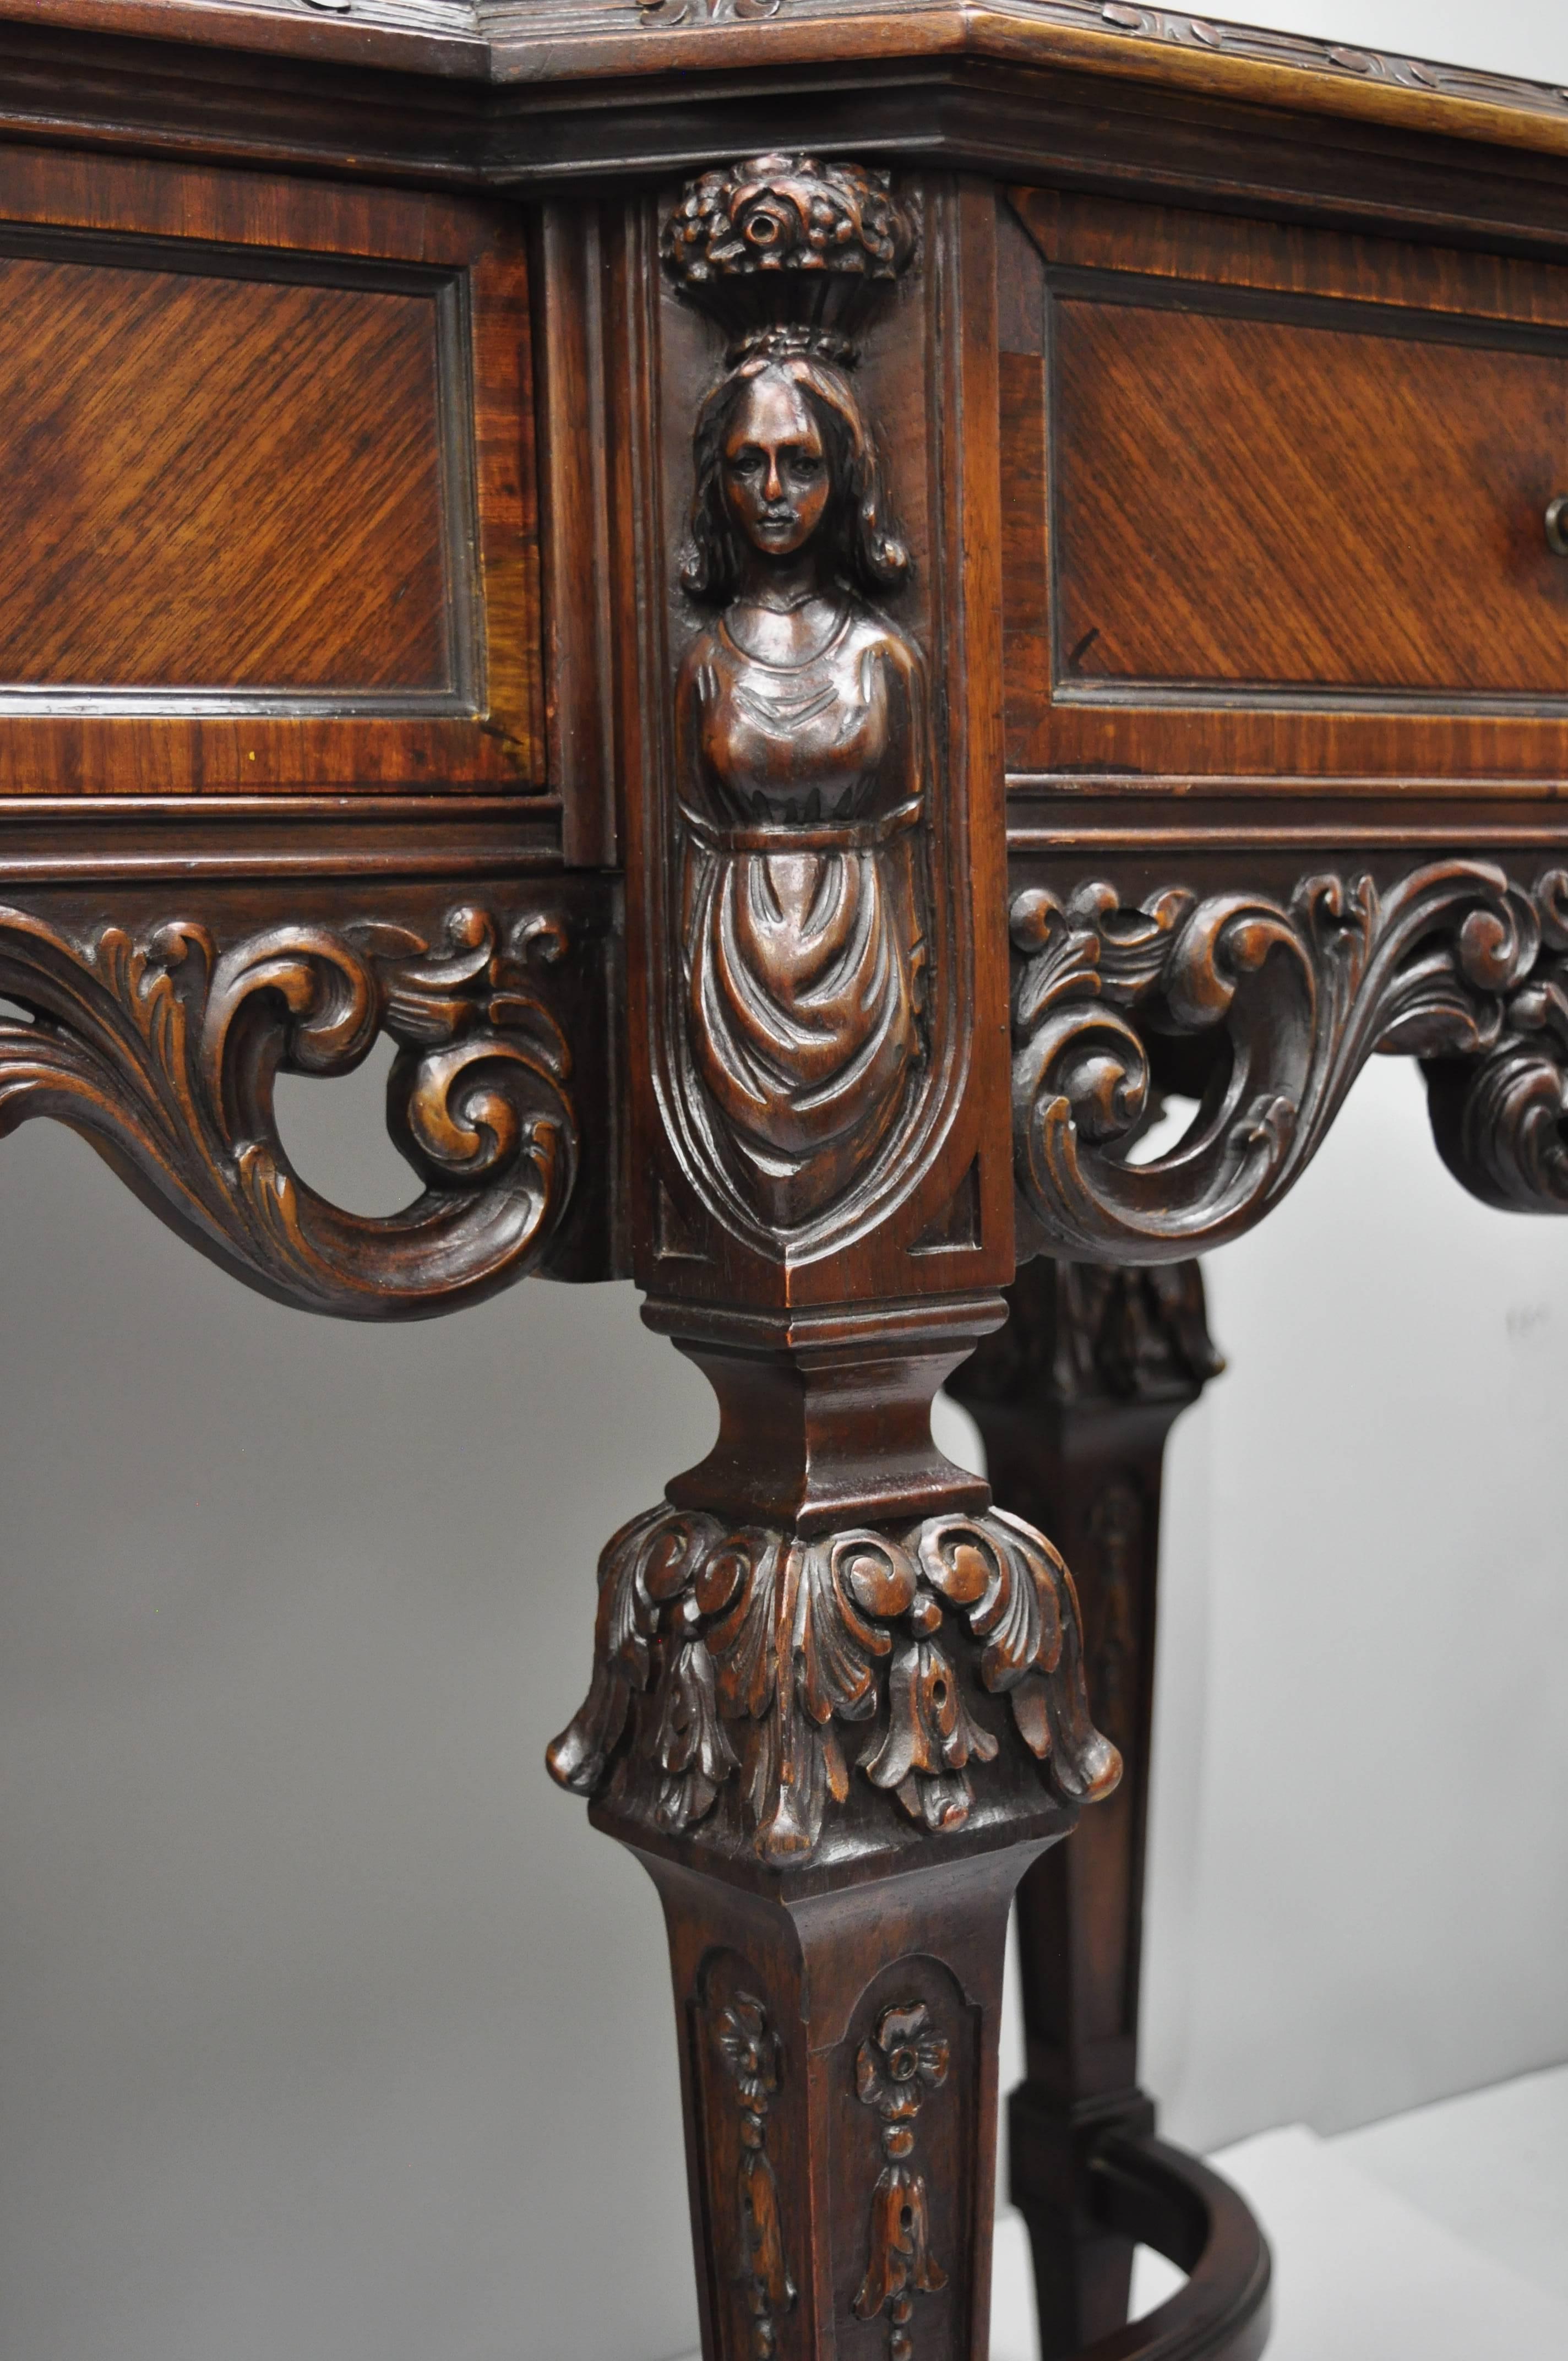 Antique Italian Renaissance Revival / French baroque style figural carved walnut sideboard. Item features rour carved female figures, shell and floral scroll work, ornately carved stretcher, long substantial size and form, very impressive sideboard,